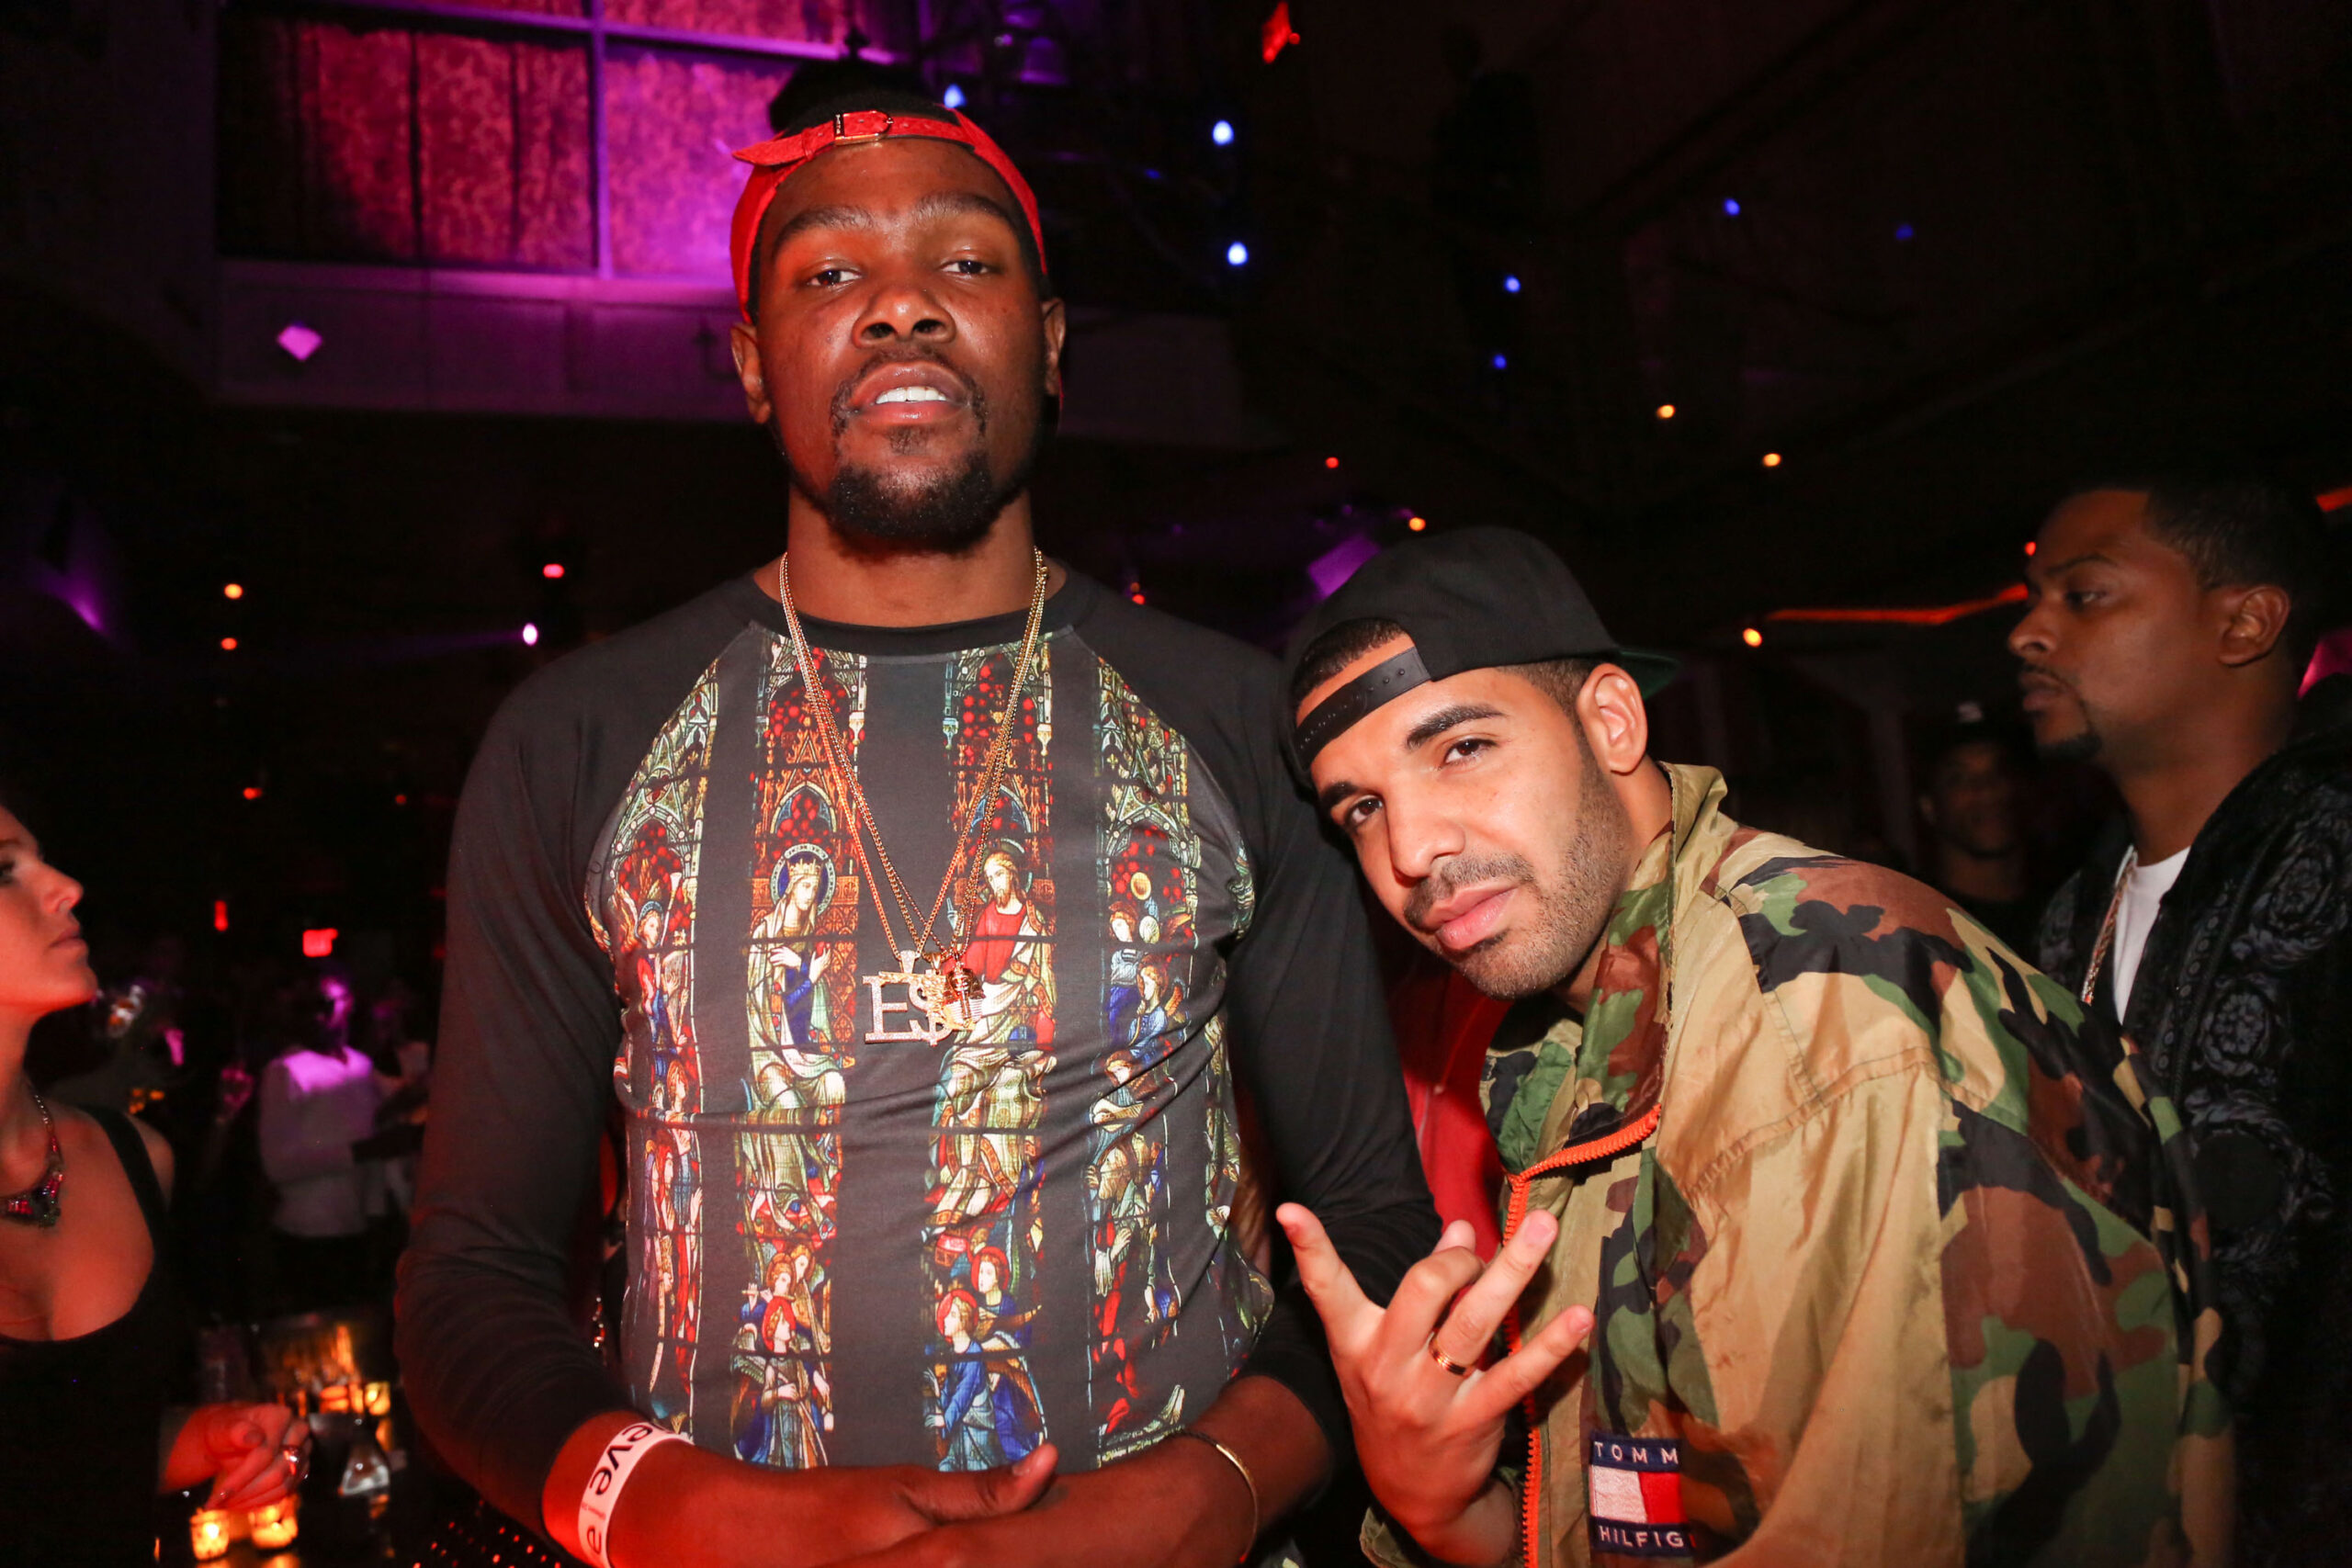 Drake enters his It's All A Blur Austin show with Kevin Durant